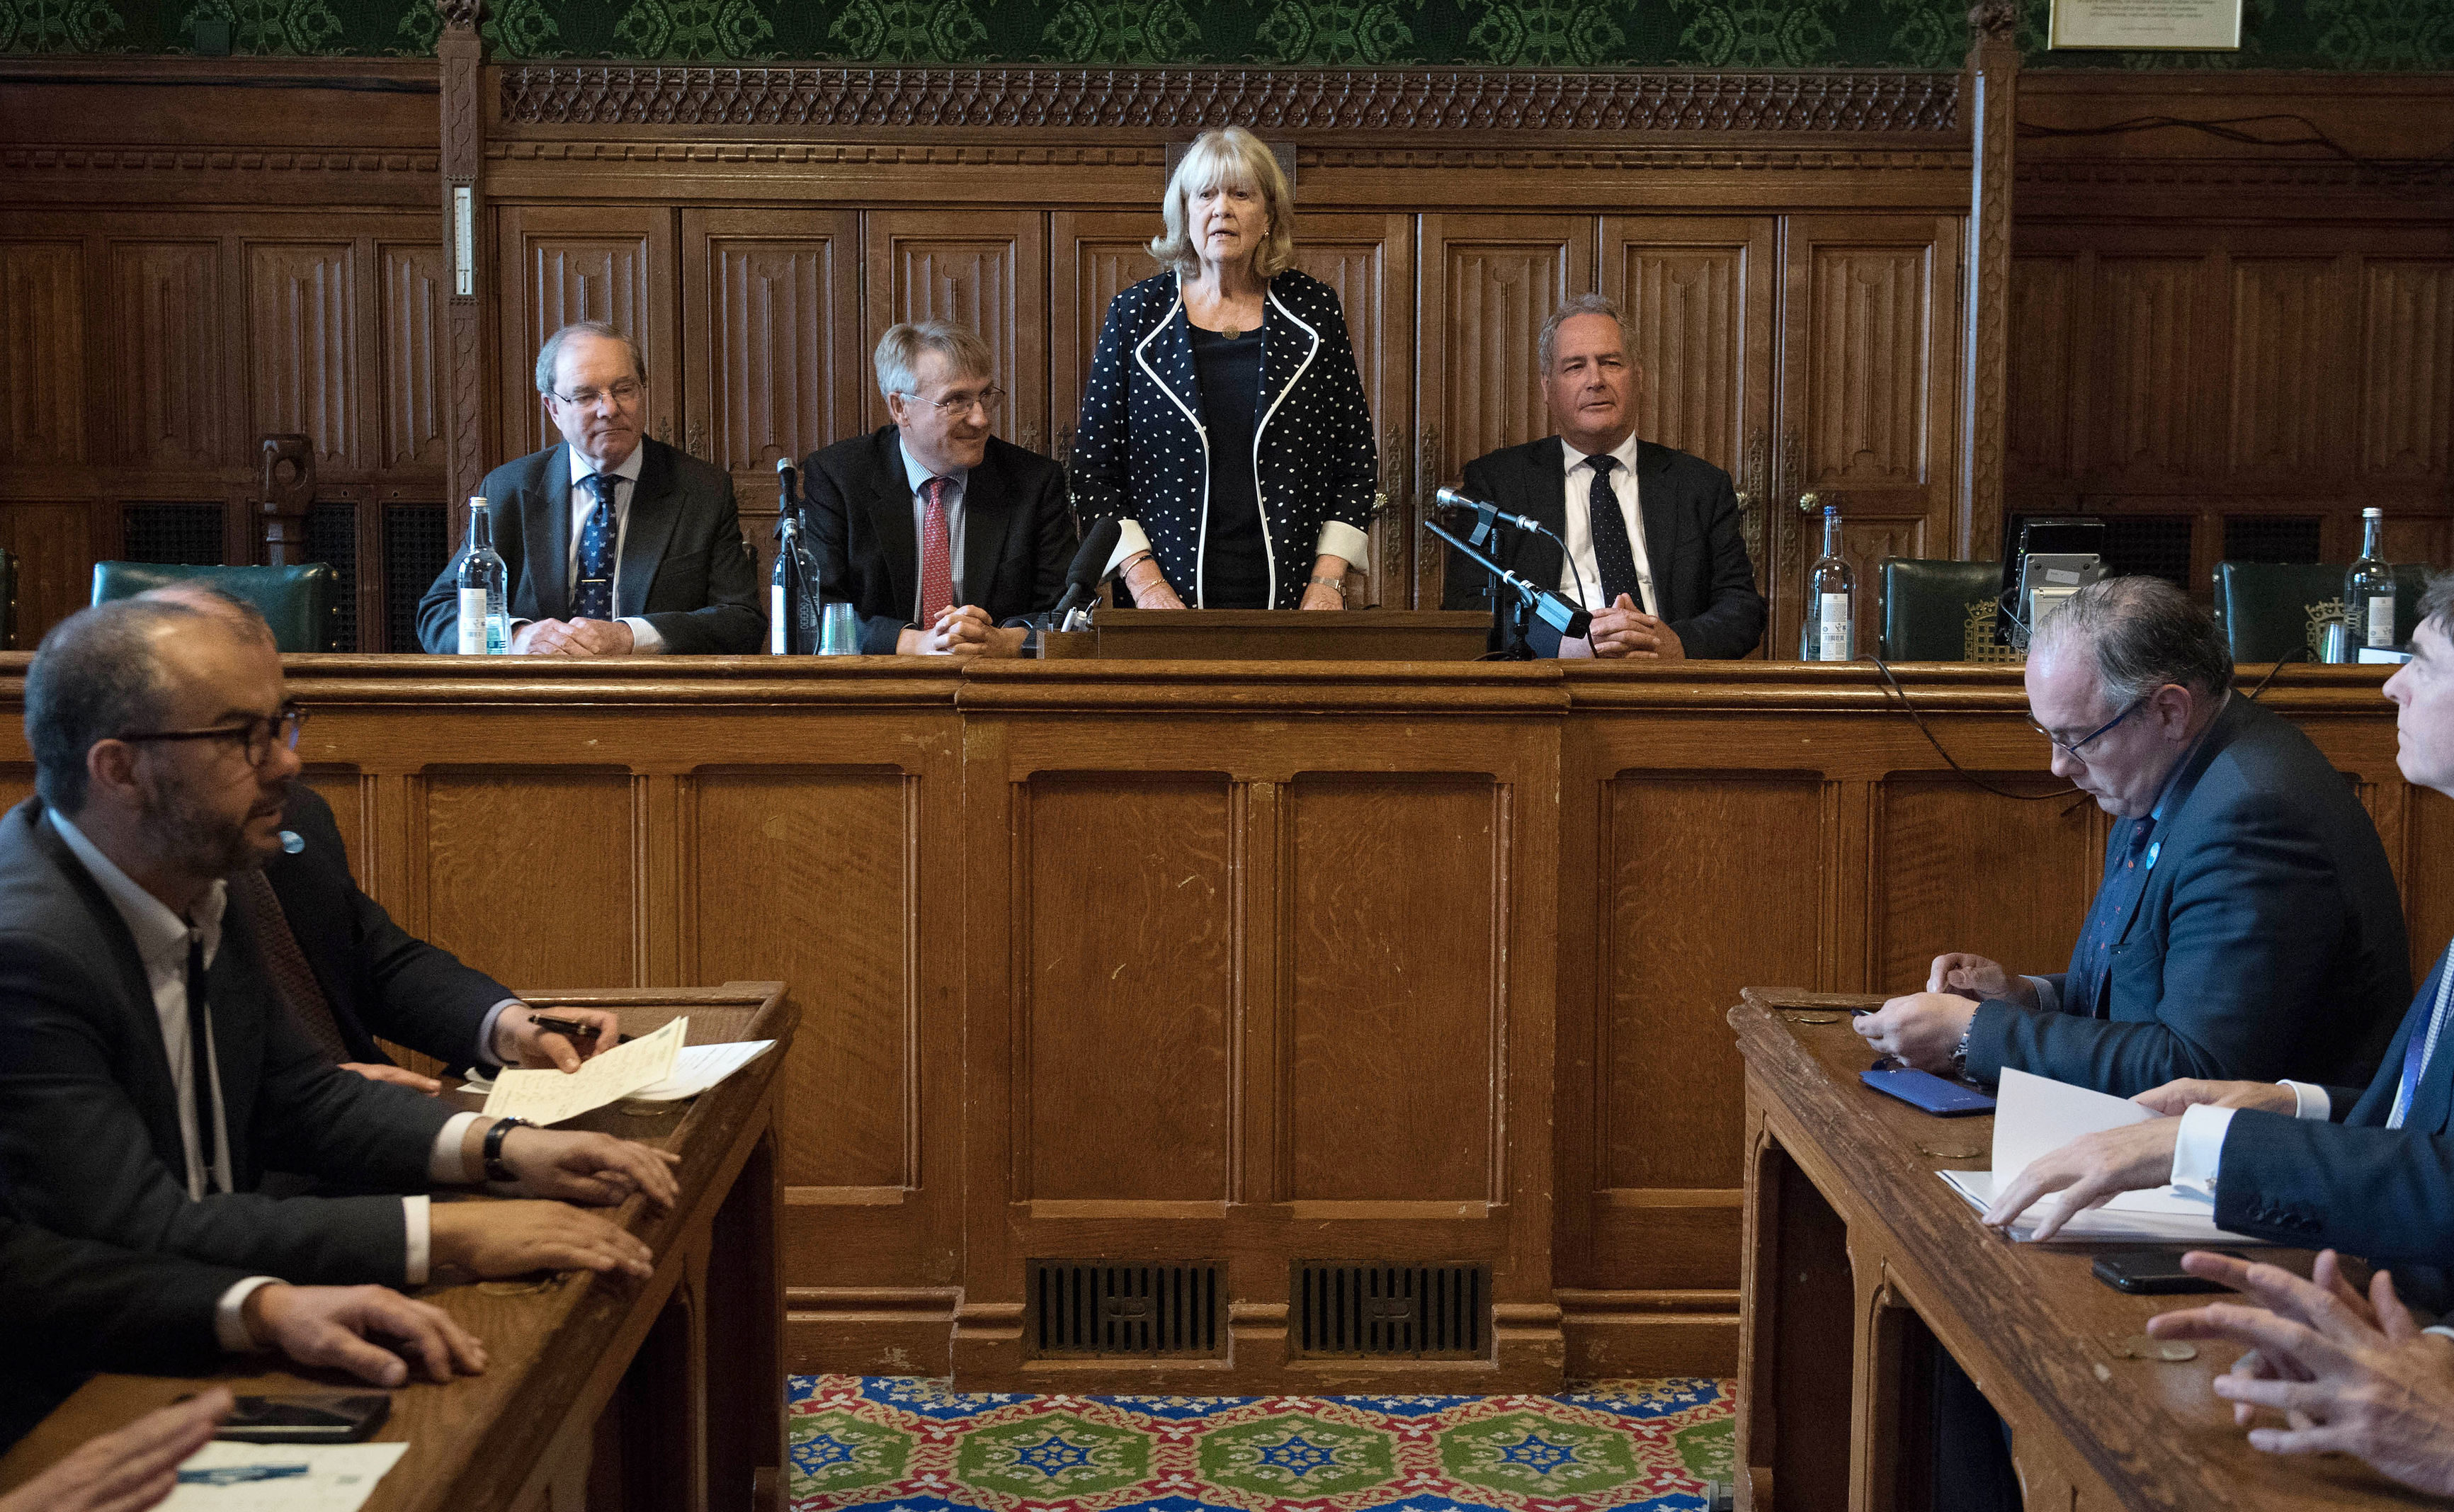 Dame Cheryl Gillan (Centre) with Charles Walker (centre left) and Bob Blackman (centre right) reads out the results of the first ballot in the Tory leadership ballot at the Houses of Parliament in Westminster, London.